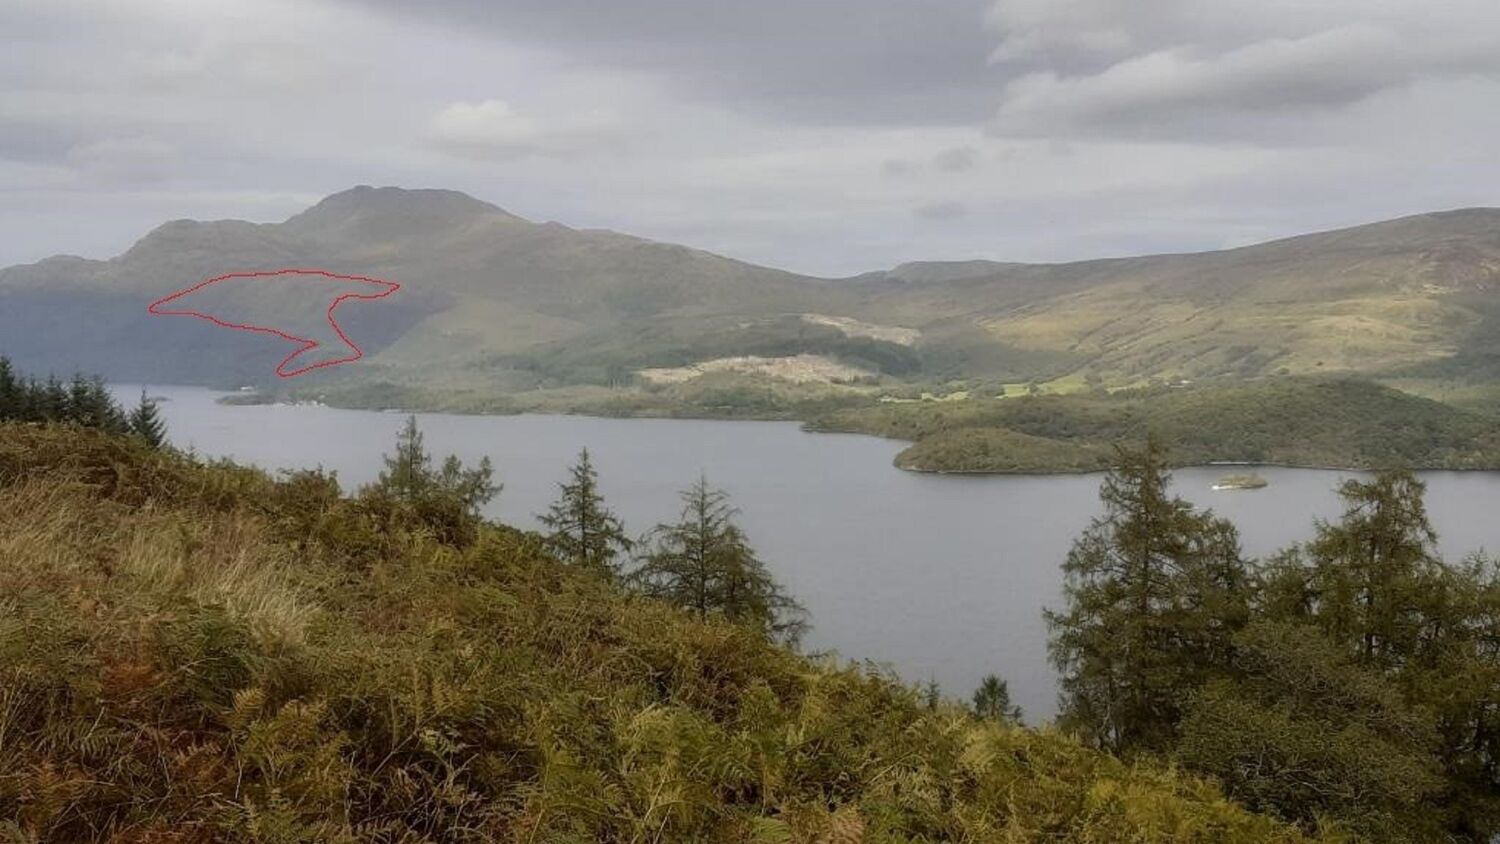 A view of the mountain Ben Lomond, from the west side of Loch Lomond. A large area of the lower slopes has been marked out with a red line. Pine trees and bracken grow in the foreground.